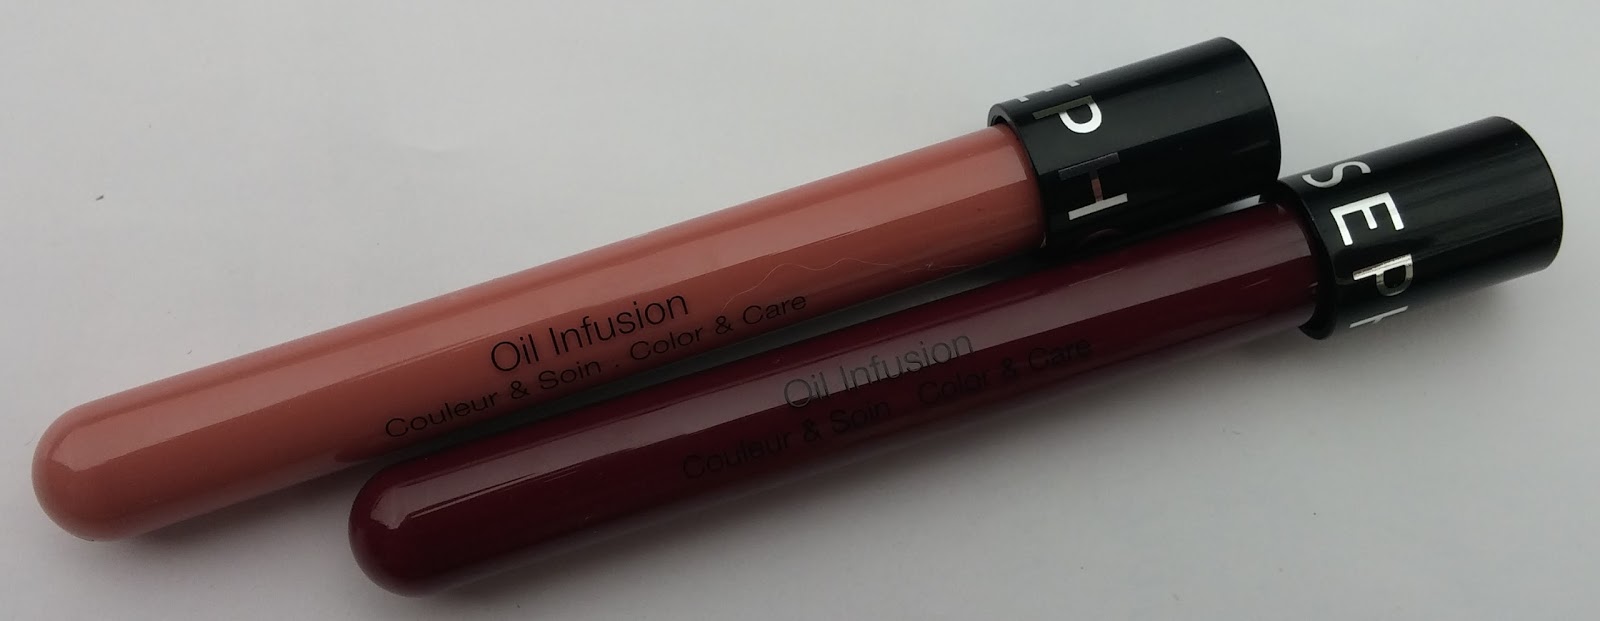 sephora oil infusion color and care review